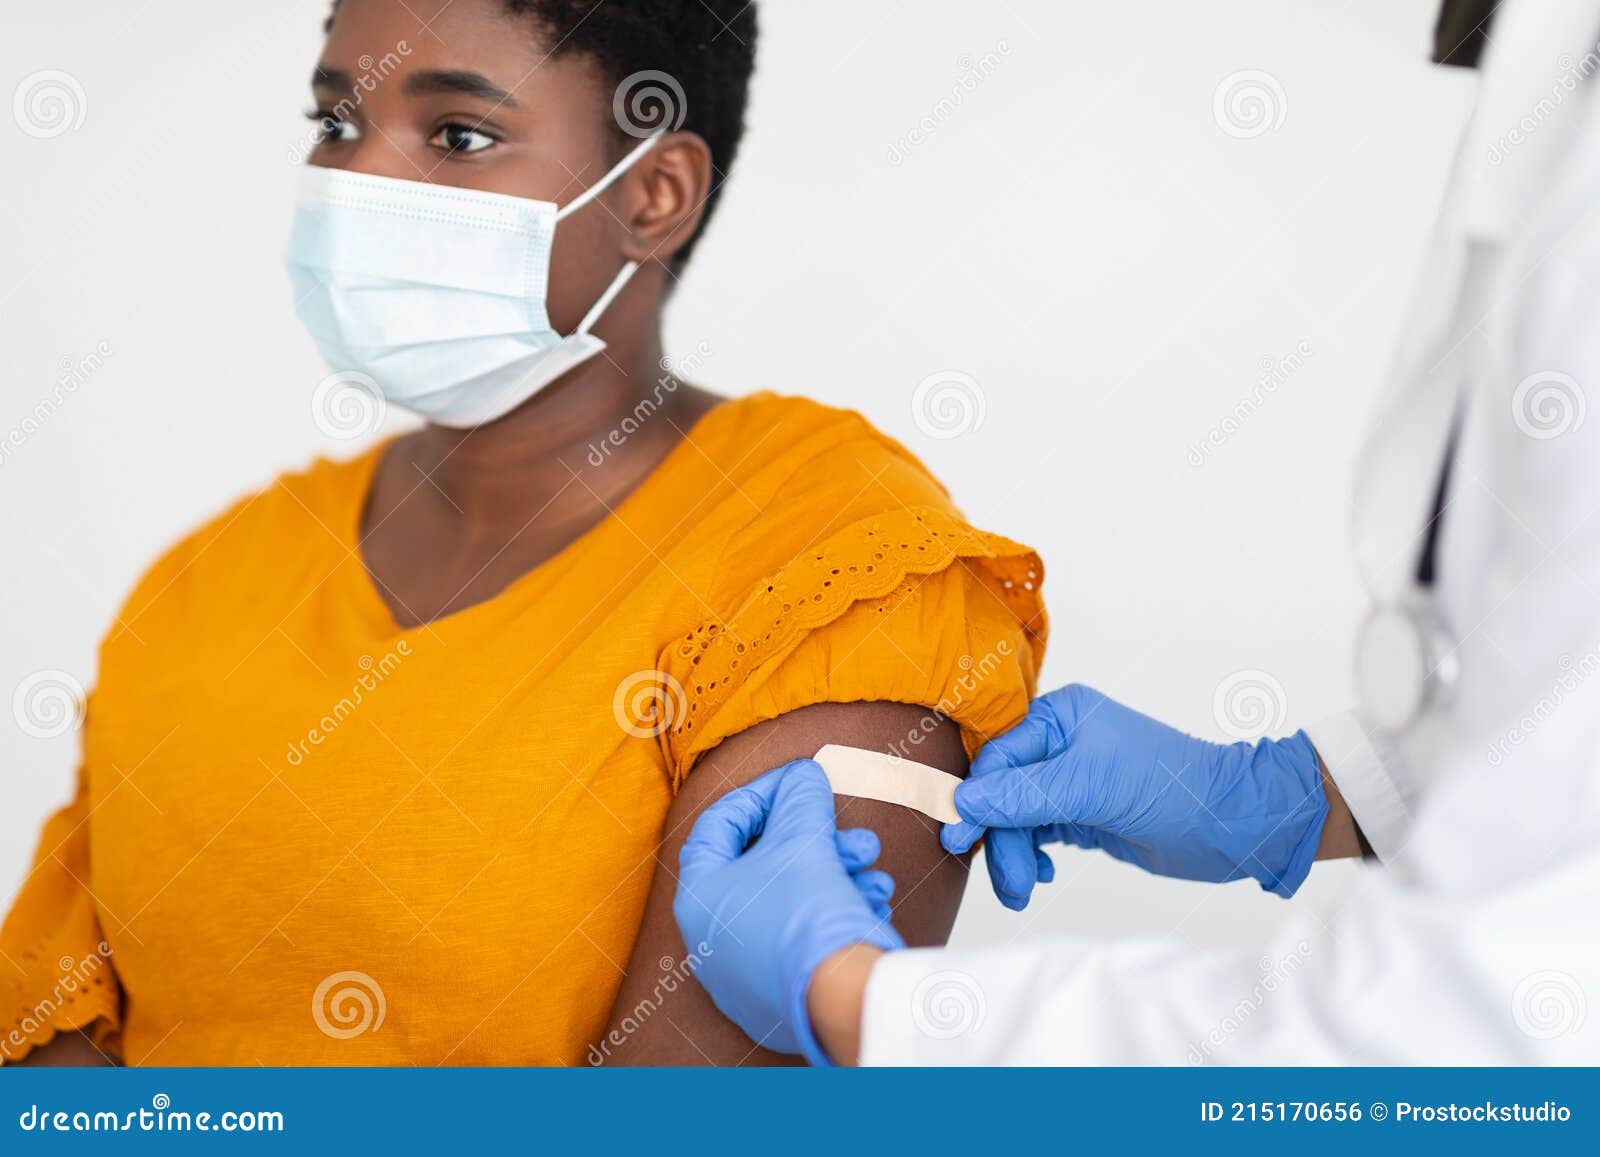 african american woman getting vaccinated against covid-19, white background, cropped